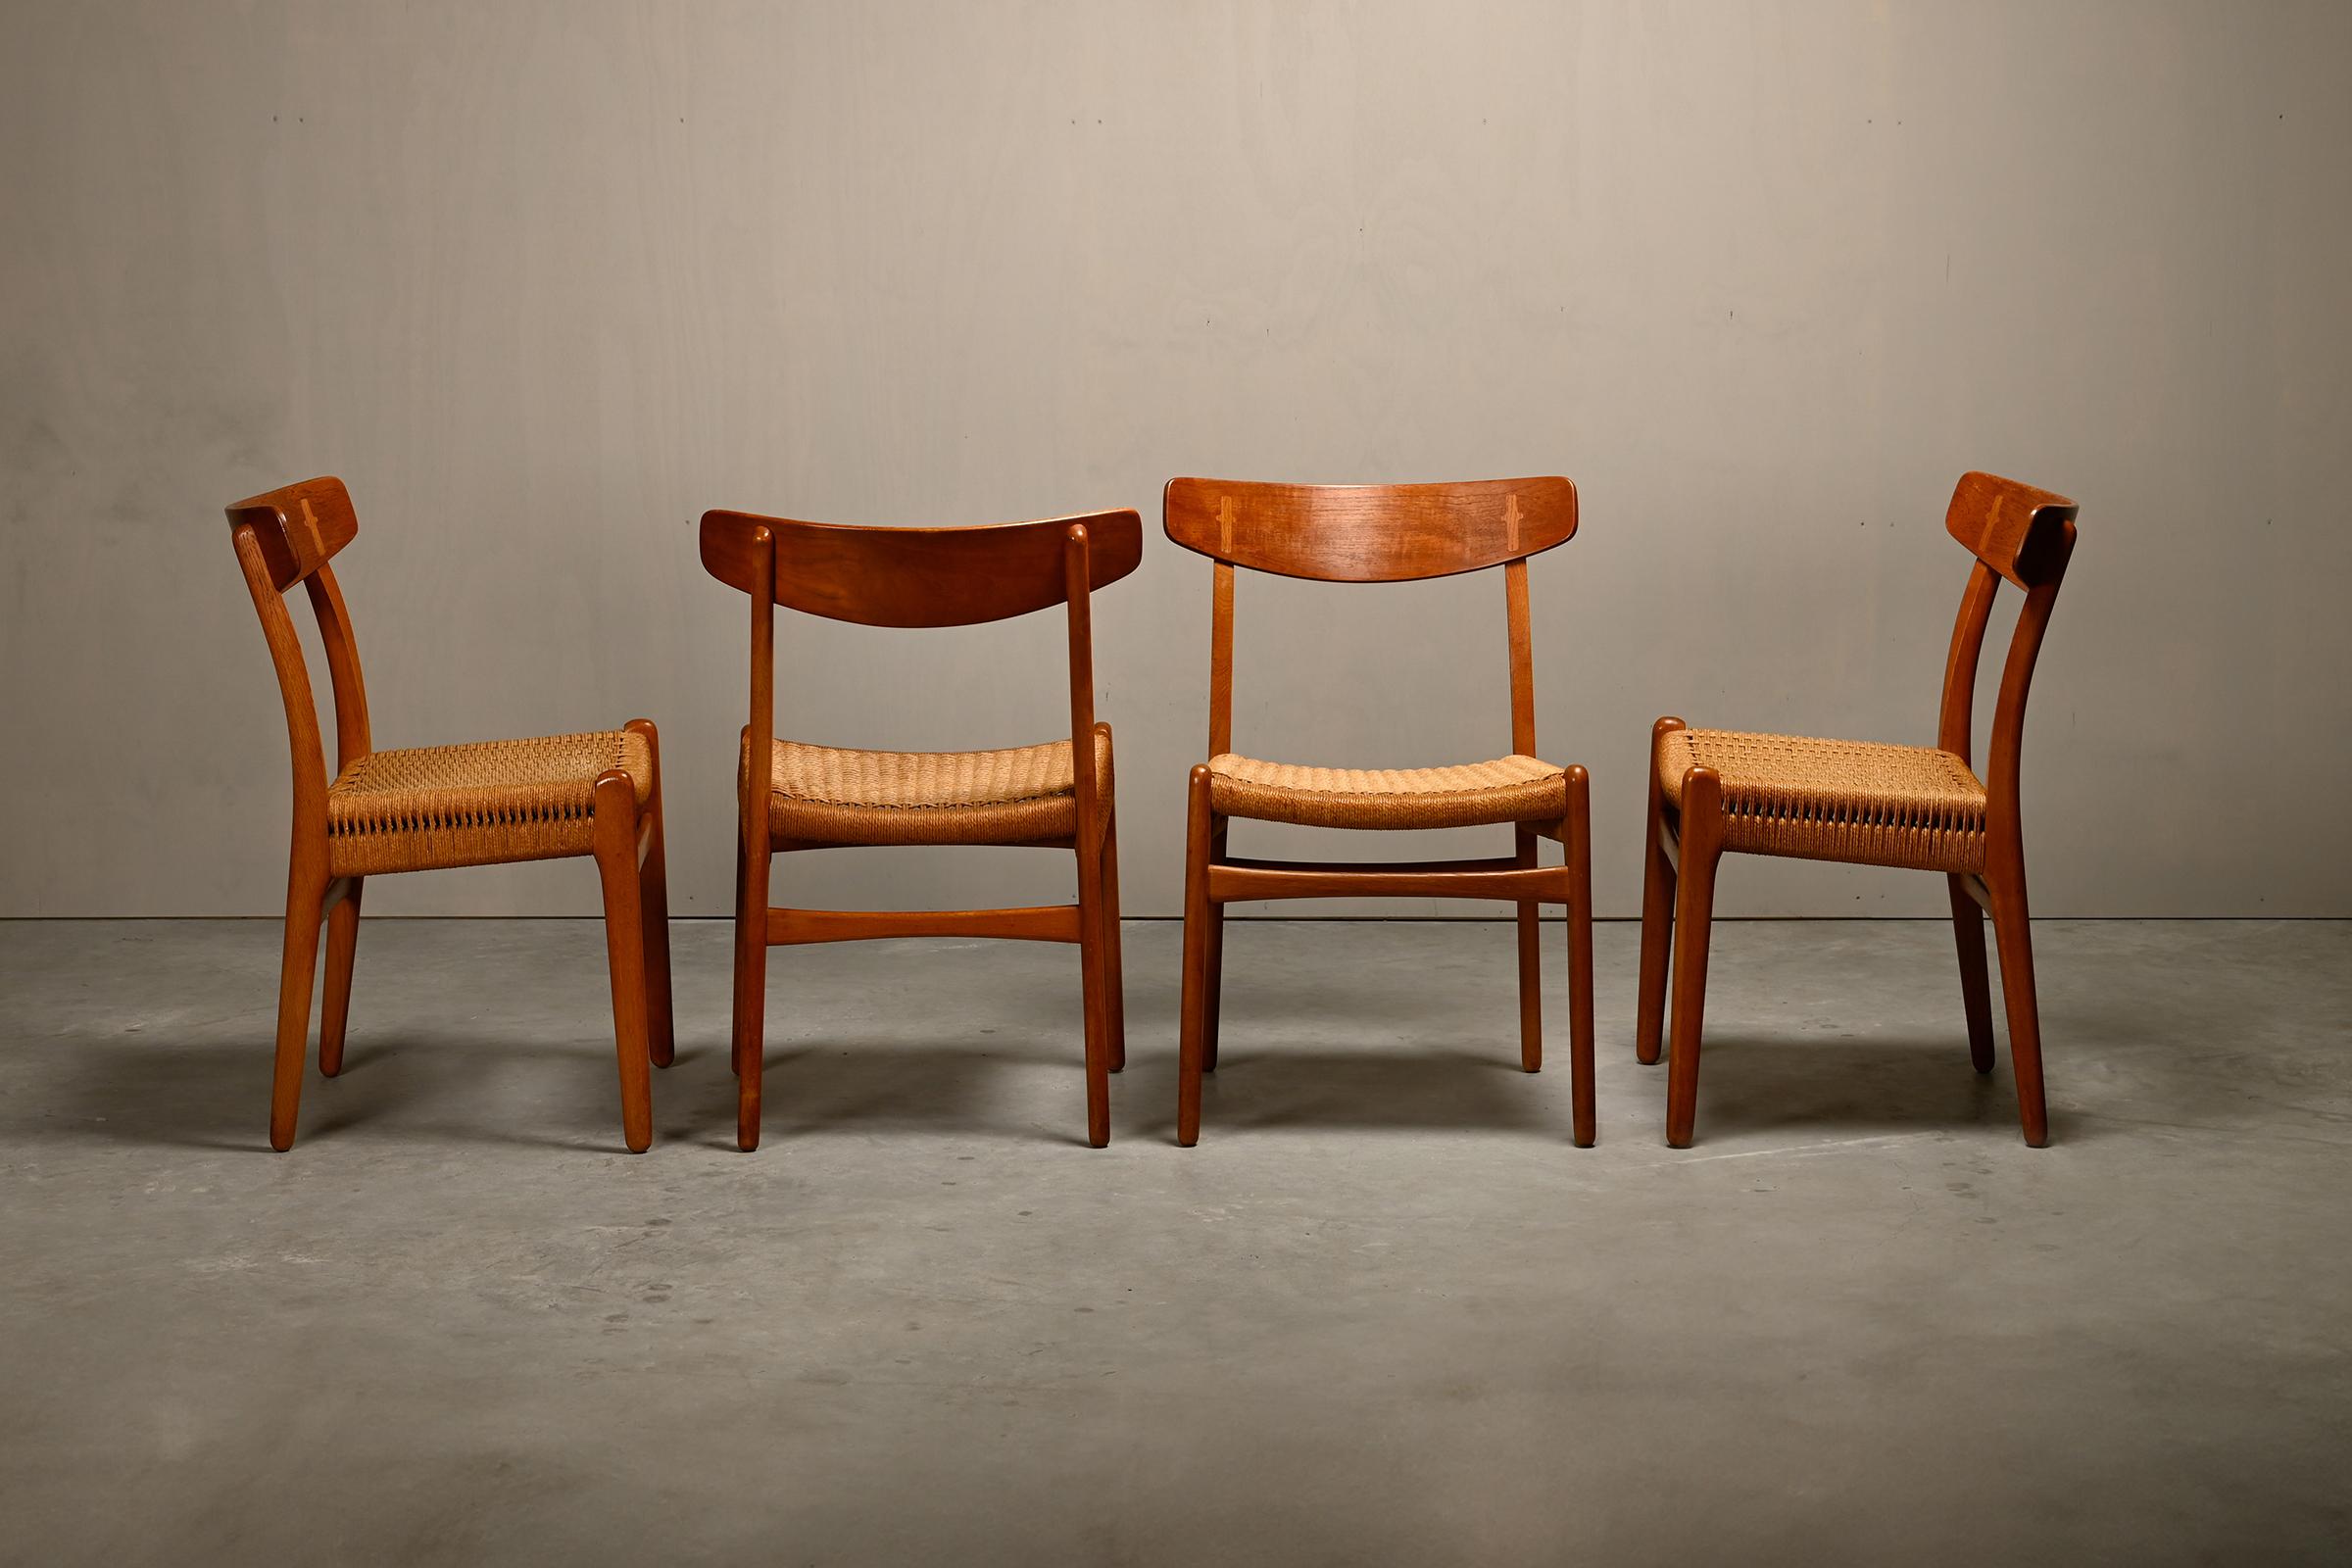 Early set of four CH23 dining chairs designed by Hans J. Wegner for Carl Hansen & Søn, Denmark 1950s. Beautifully and warm aged Oak frames with teak backrests and hand woven papercord seats. Very good original vintage condition with slight traces of